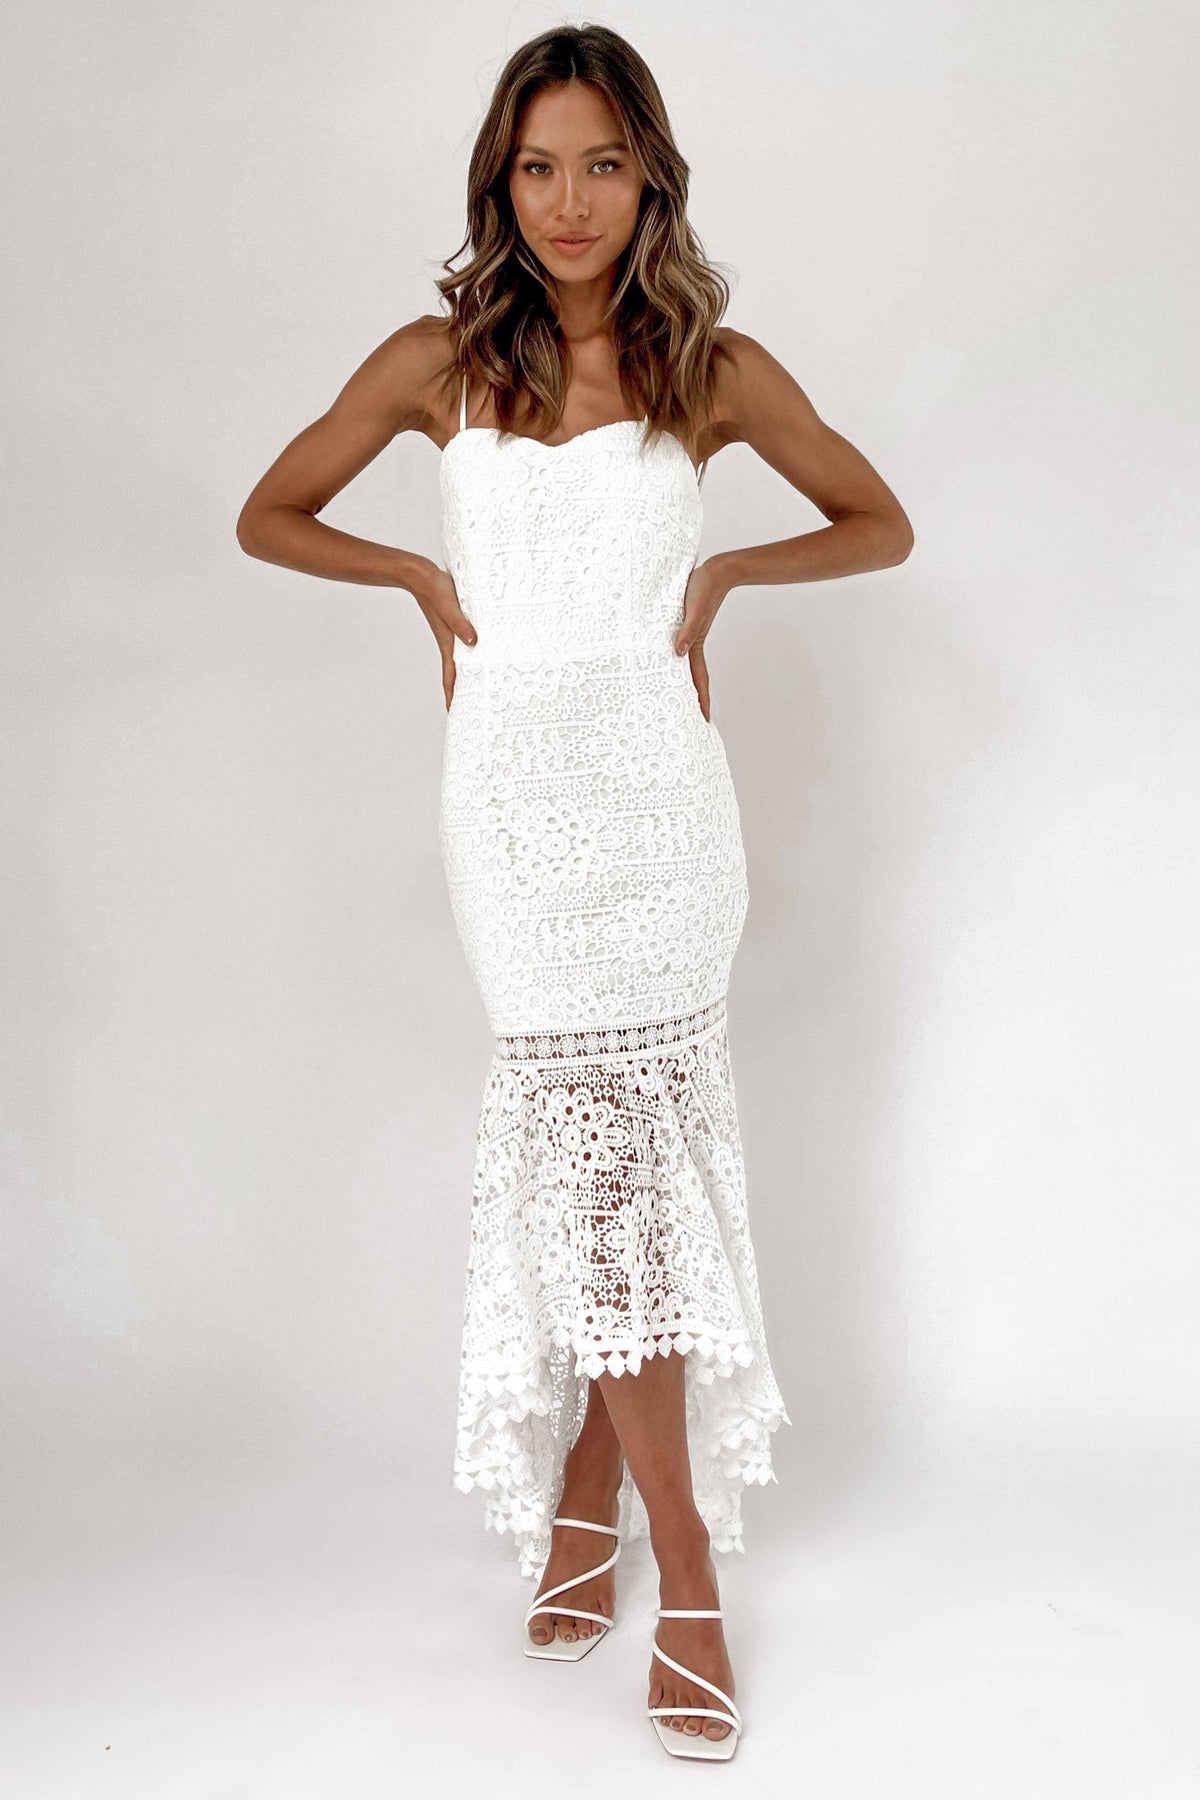 Terrell Dress, BACKLESS, DRESS, DRESSES, FISH TAIL, LACE, NEW ARRIVALS, OPEN BACK, Sale, SPECIAL OCCASION, TIE UP, VINTAGE, Terrell Dress only $136.00 @ MISHKAH ONLINE FASHION BOUTIQUE, Shop The Latest Women&#39;s Dresses - Our New Terrell Dress is only $136.00, @ MISHKAH ONLINE FASHION BOUTIQUE-MISHKAH